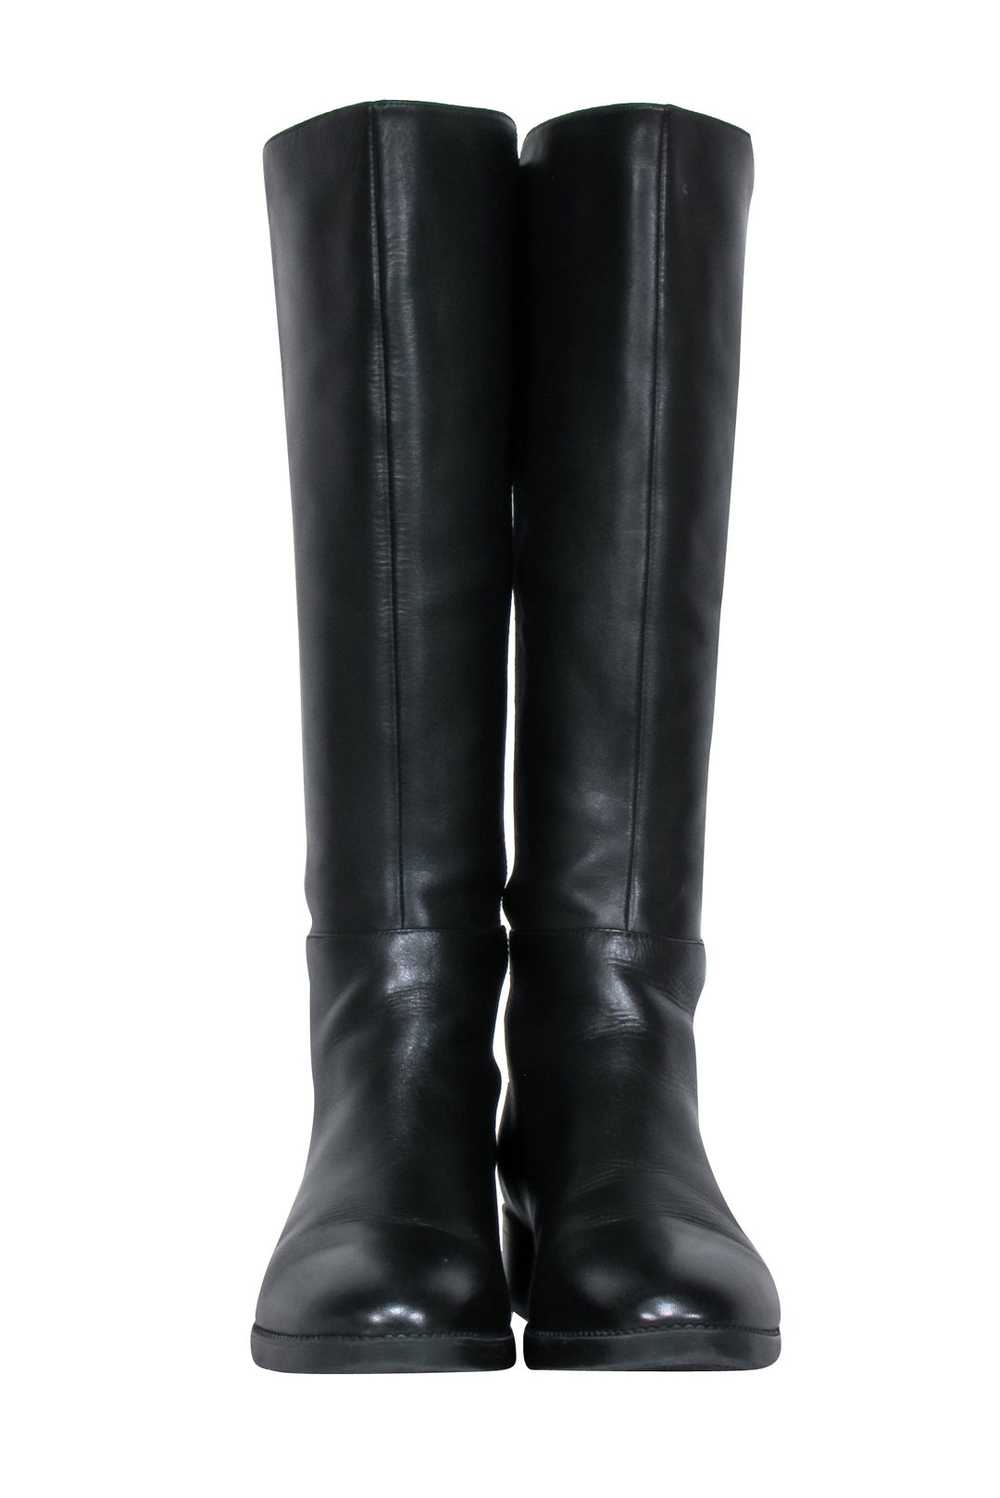 Tory Burch - Black Leather "Caitlin" Stretch Boot… - image 2